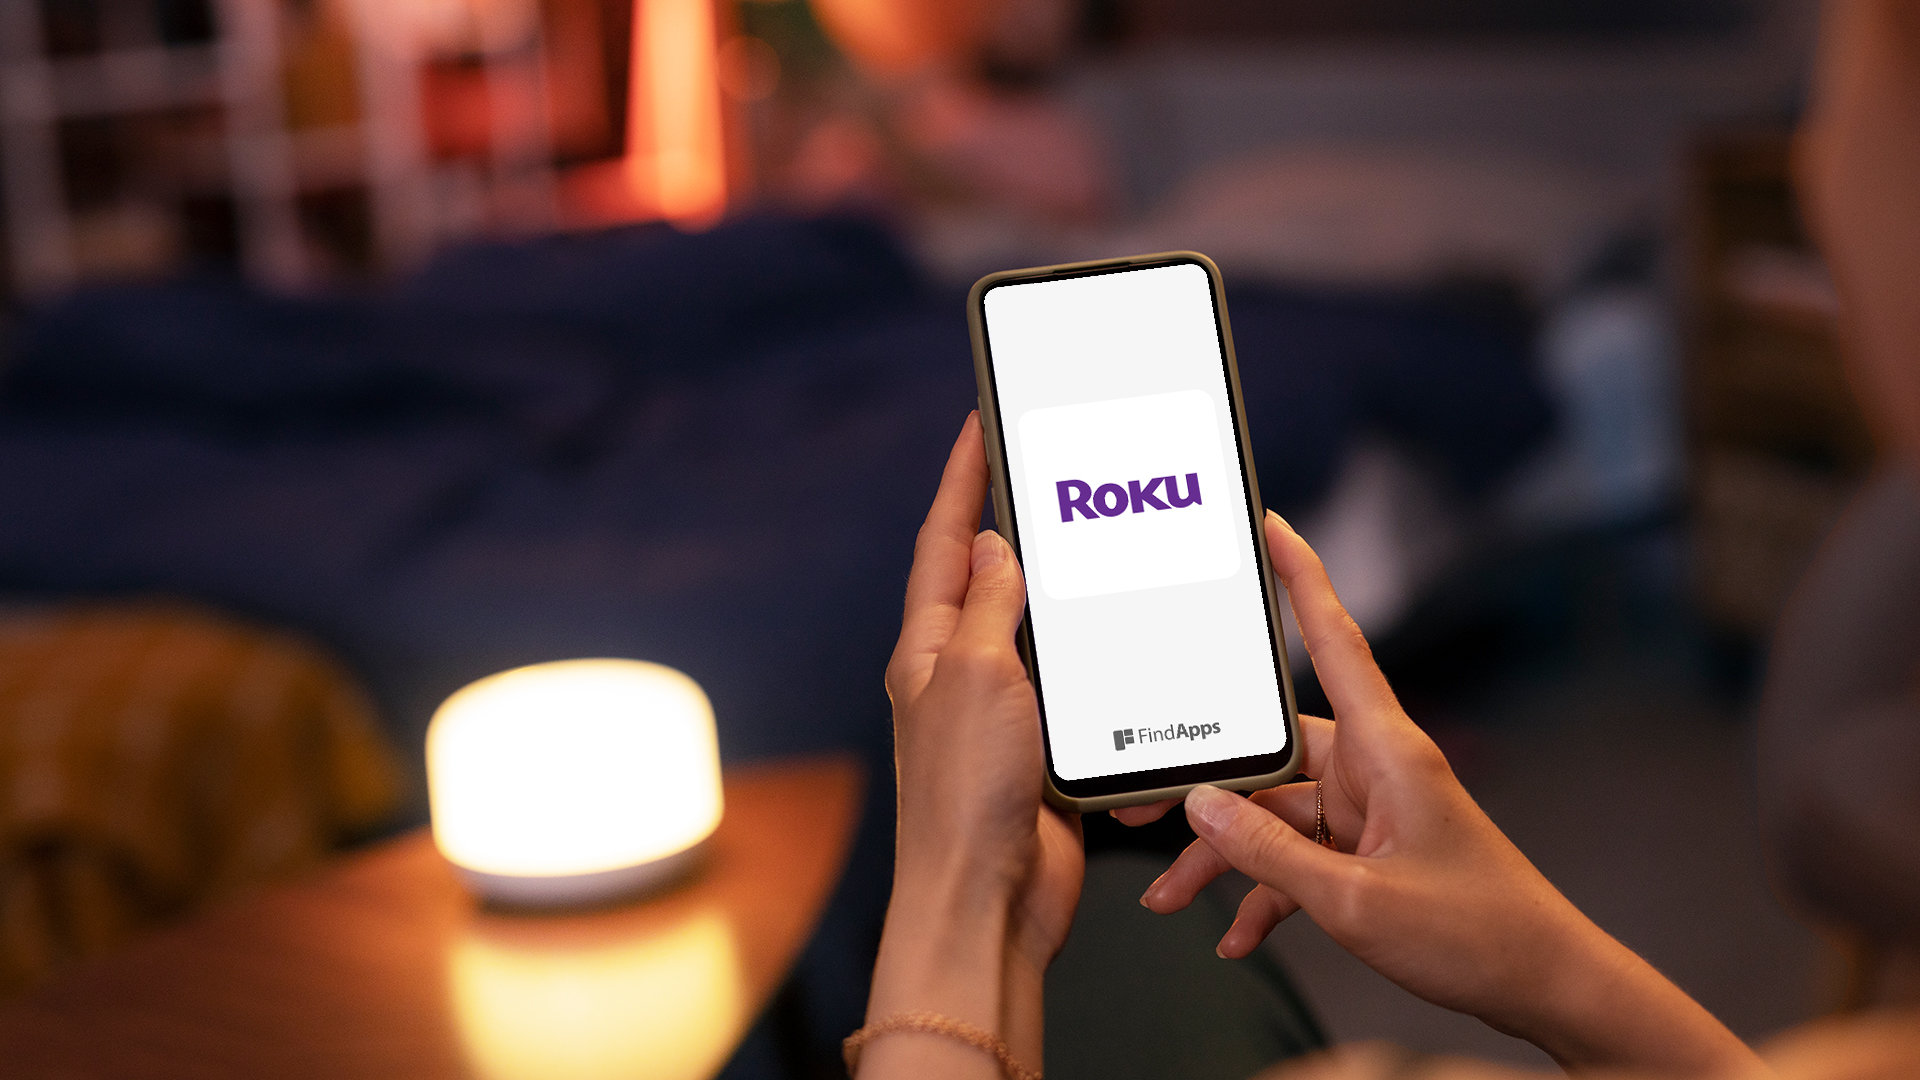 The Official Roku apps. Reviewed.